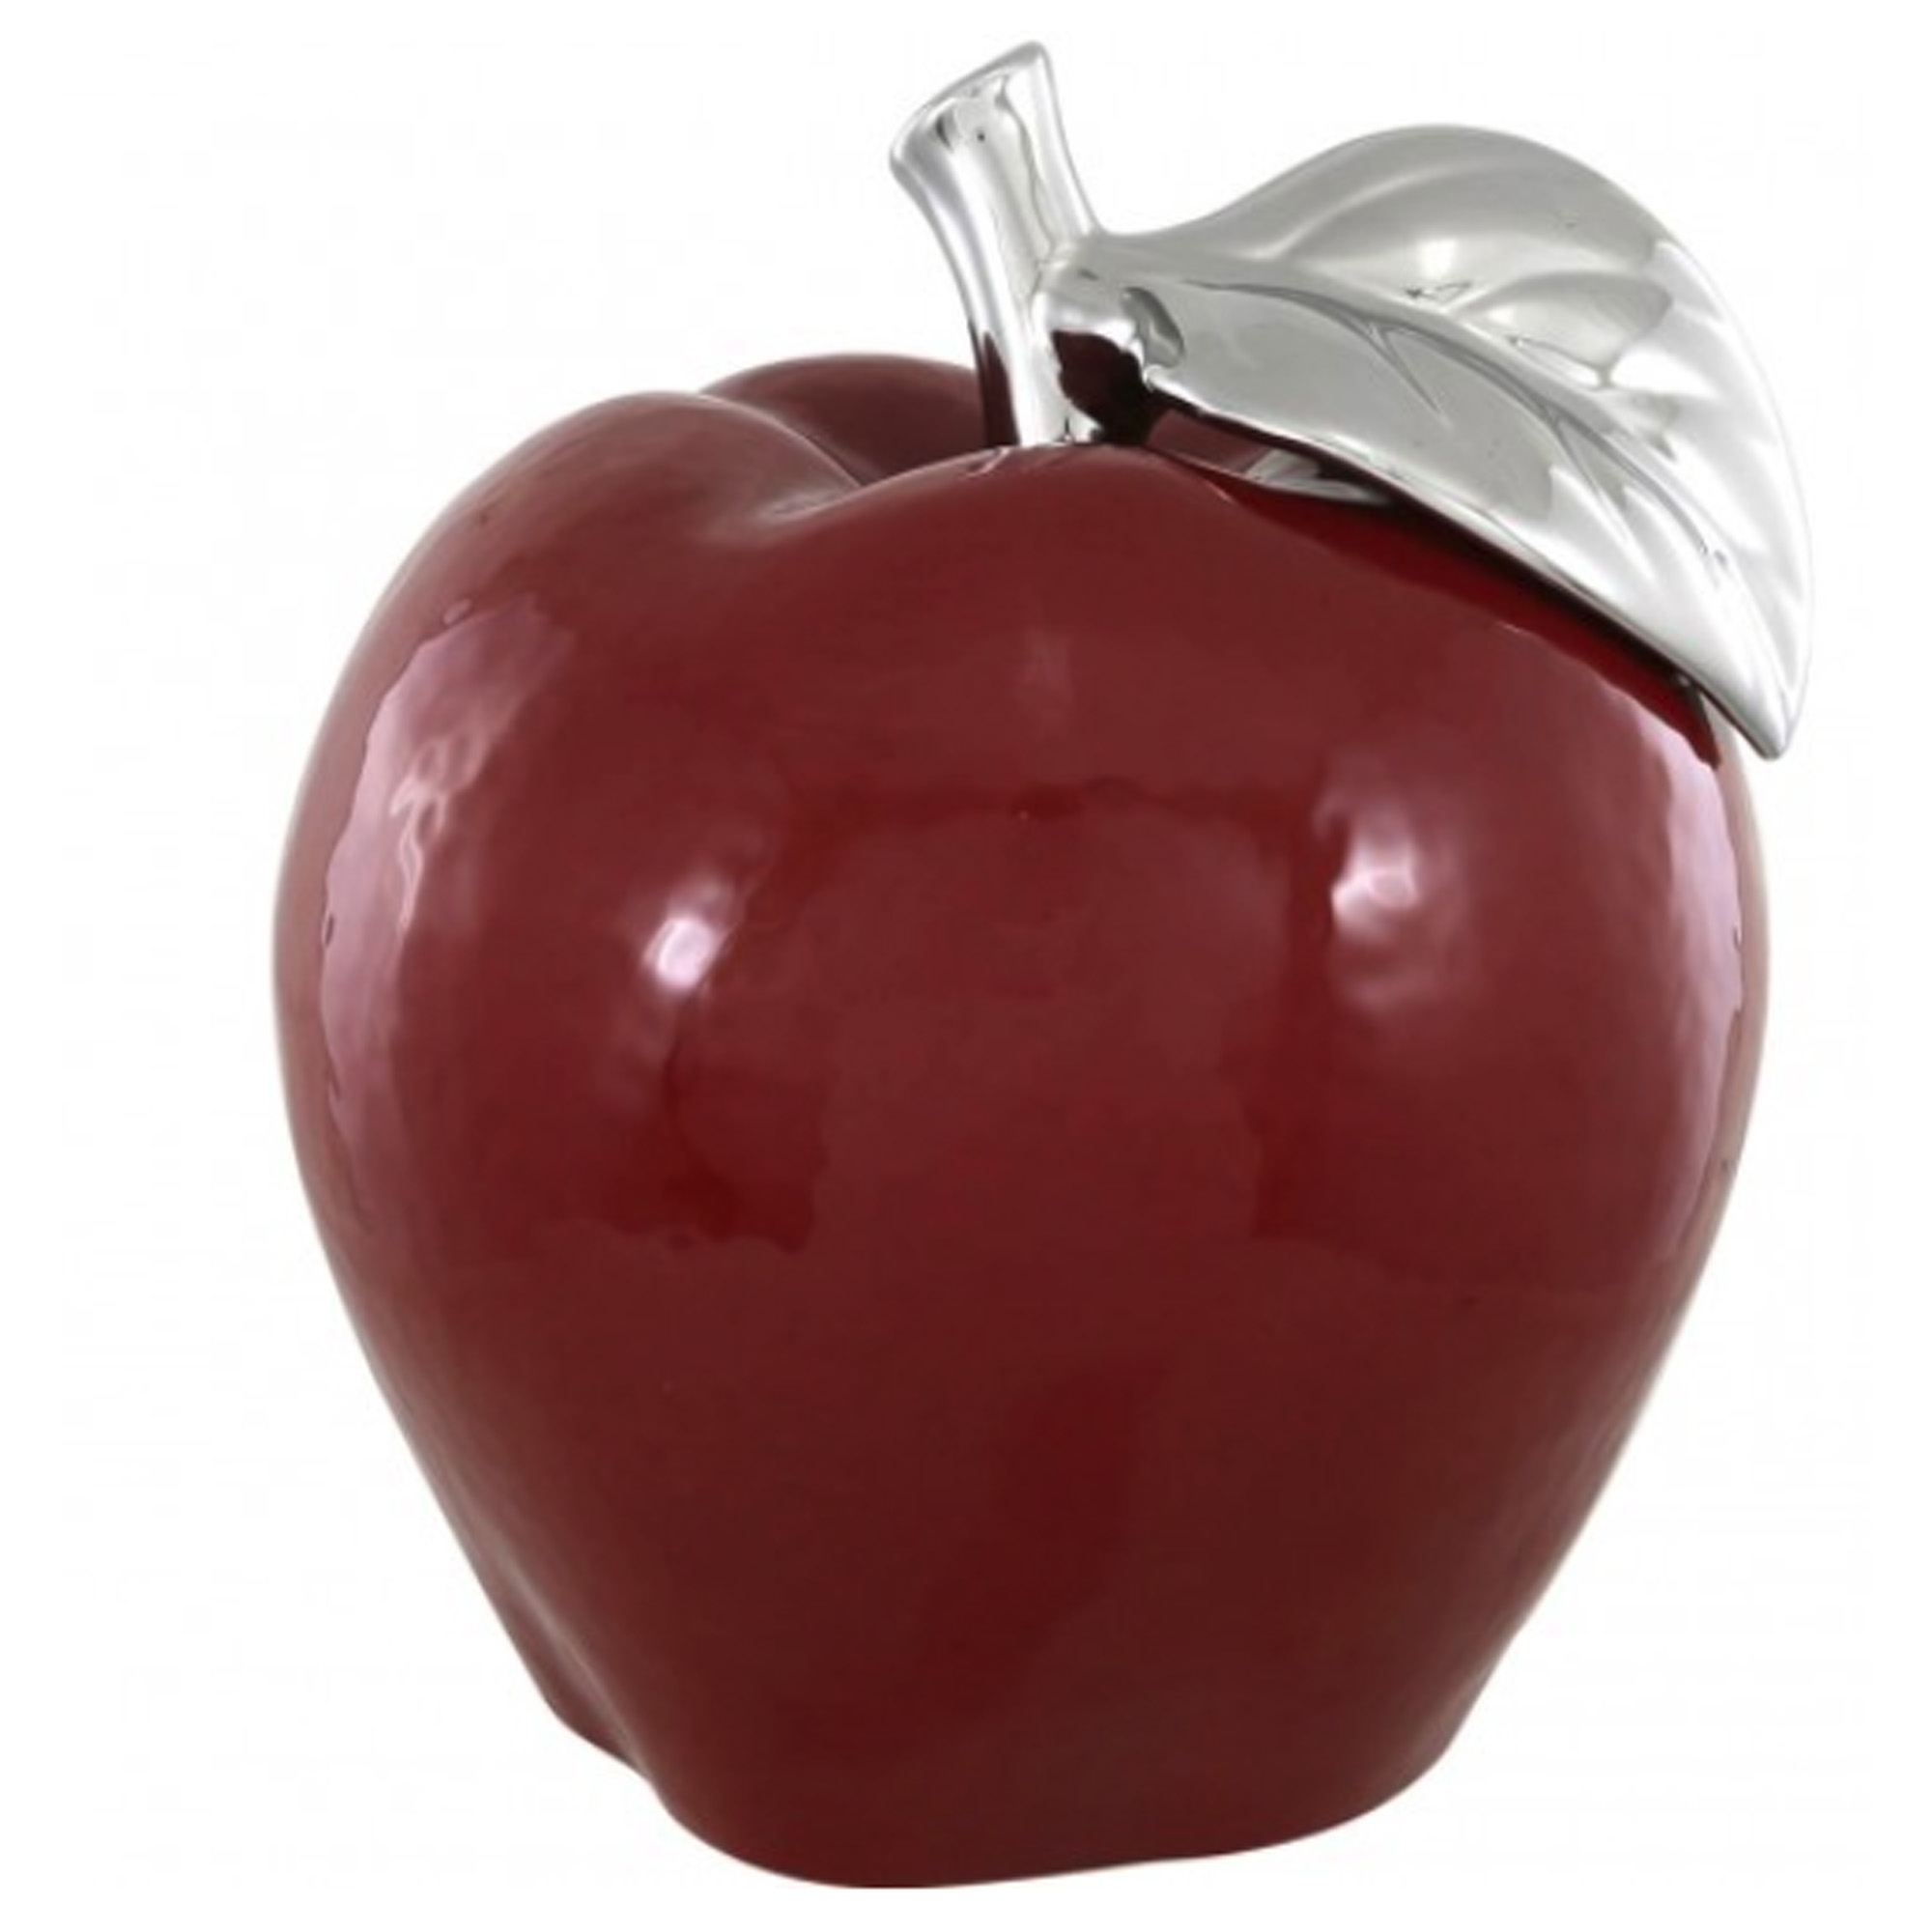 Large Red Apple Ornament | Ornaments | Home Accessories